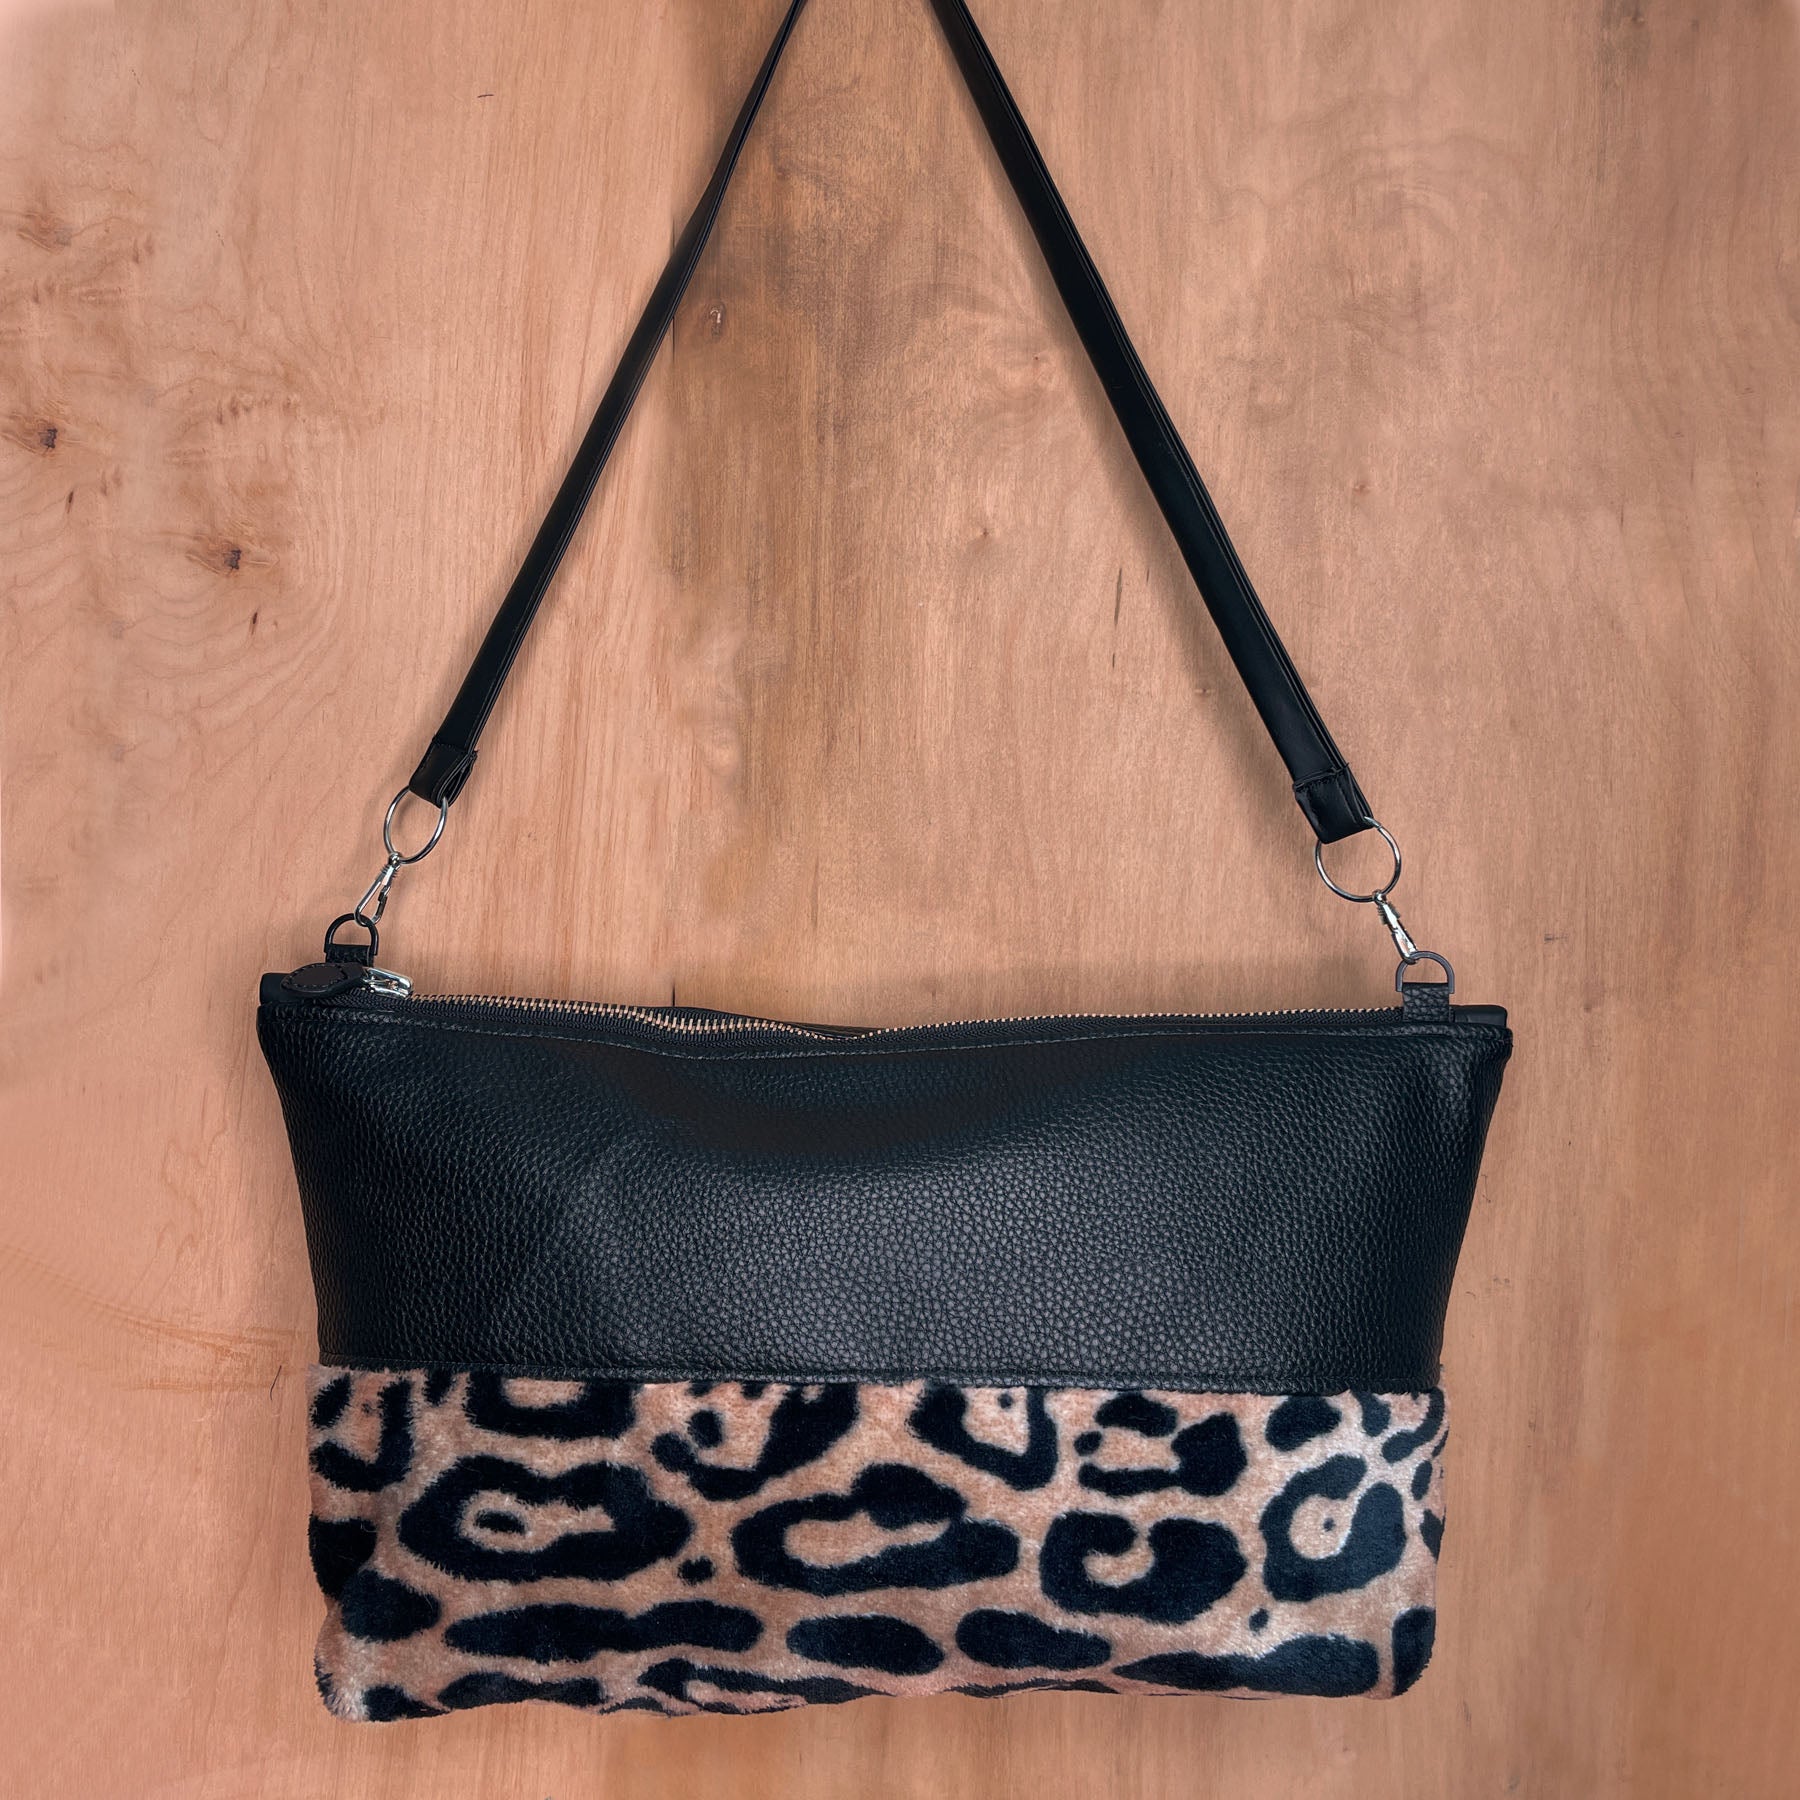 cheetah plush purse. upcycled handmade unique handbags, recycled denim bags, handmade genuine leather bags, completely one of a kind bags made by local brooklyn designers.